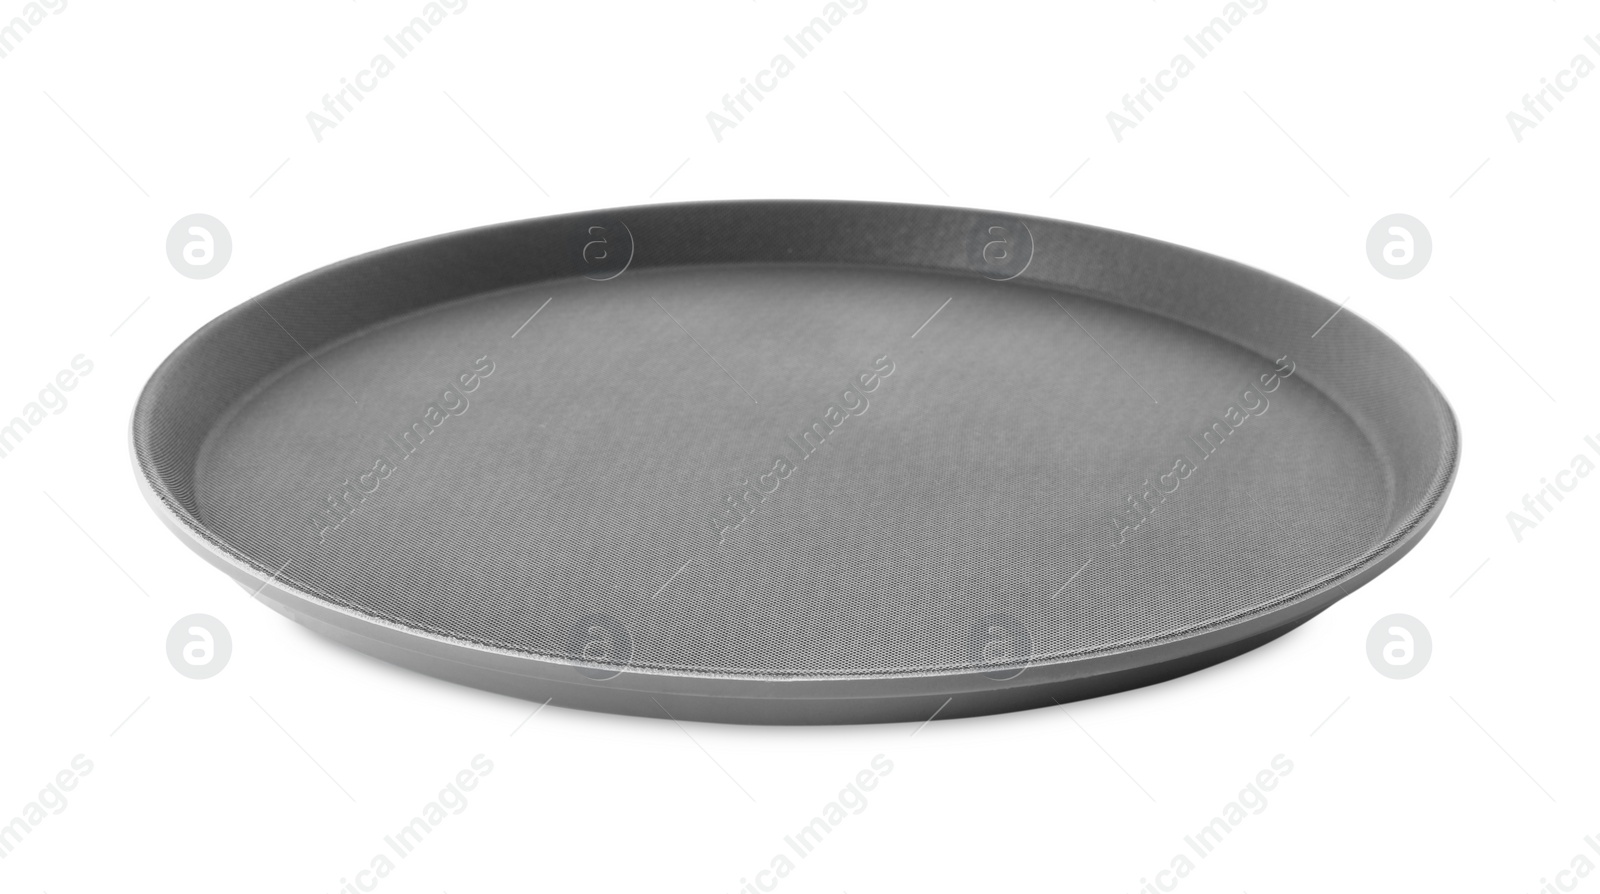 Photo of New black serving tray isolated on white